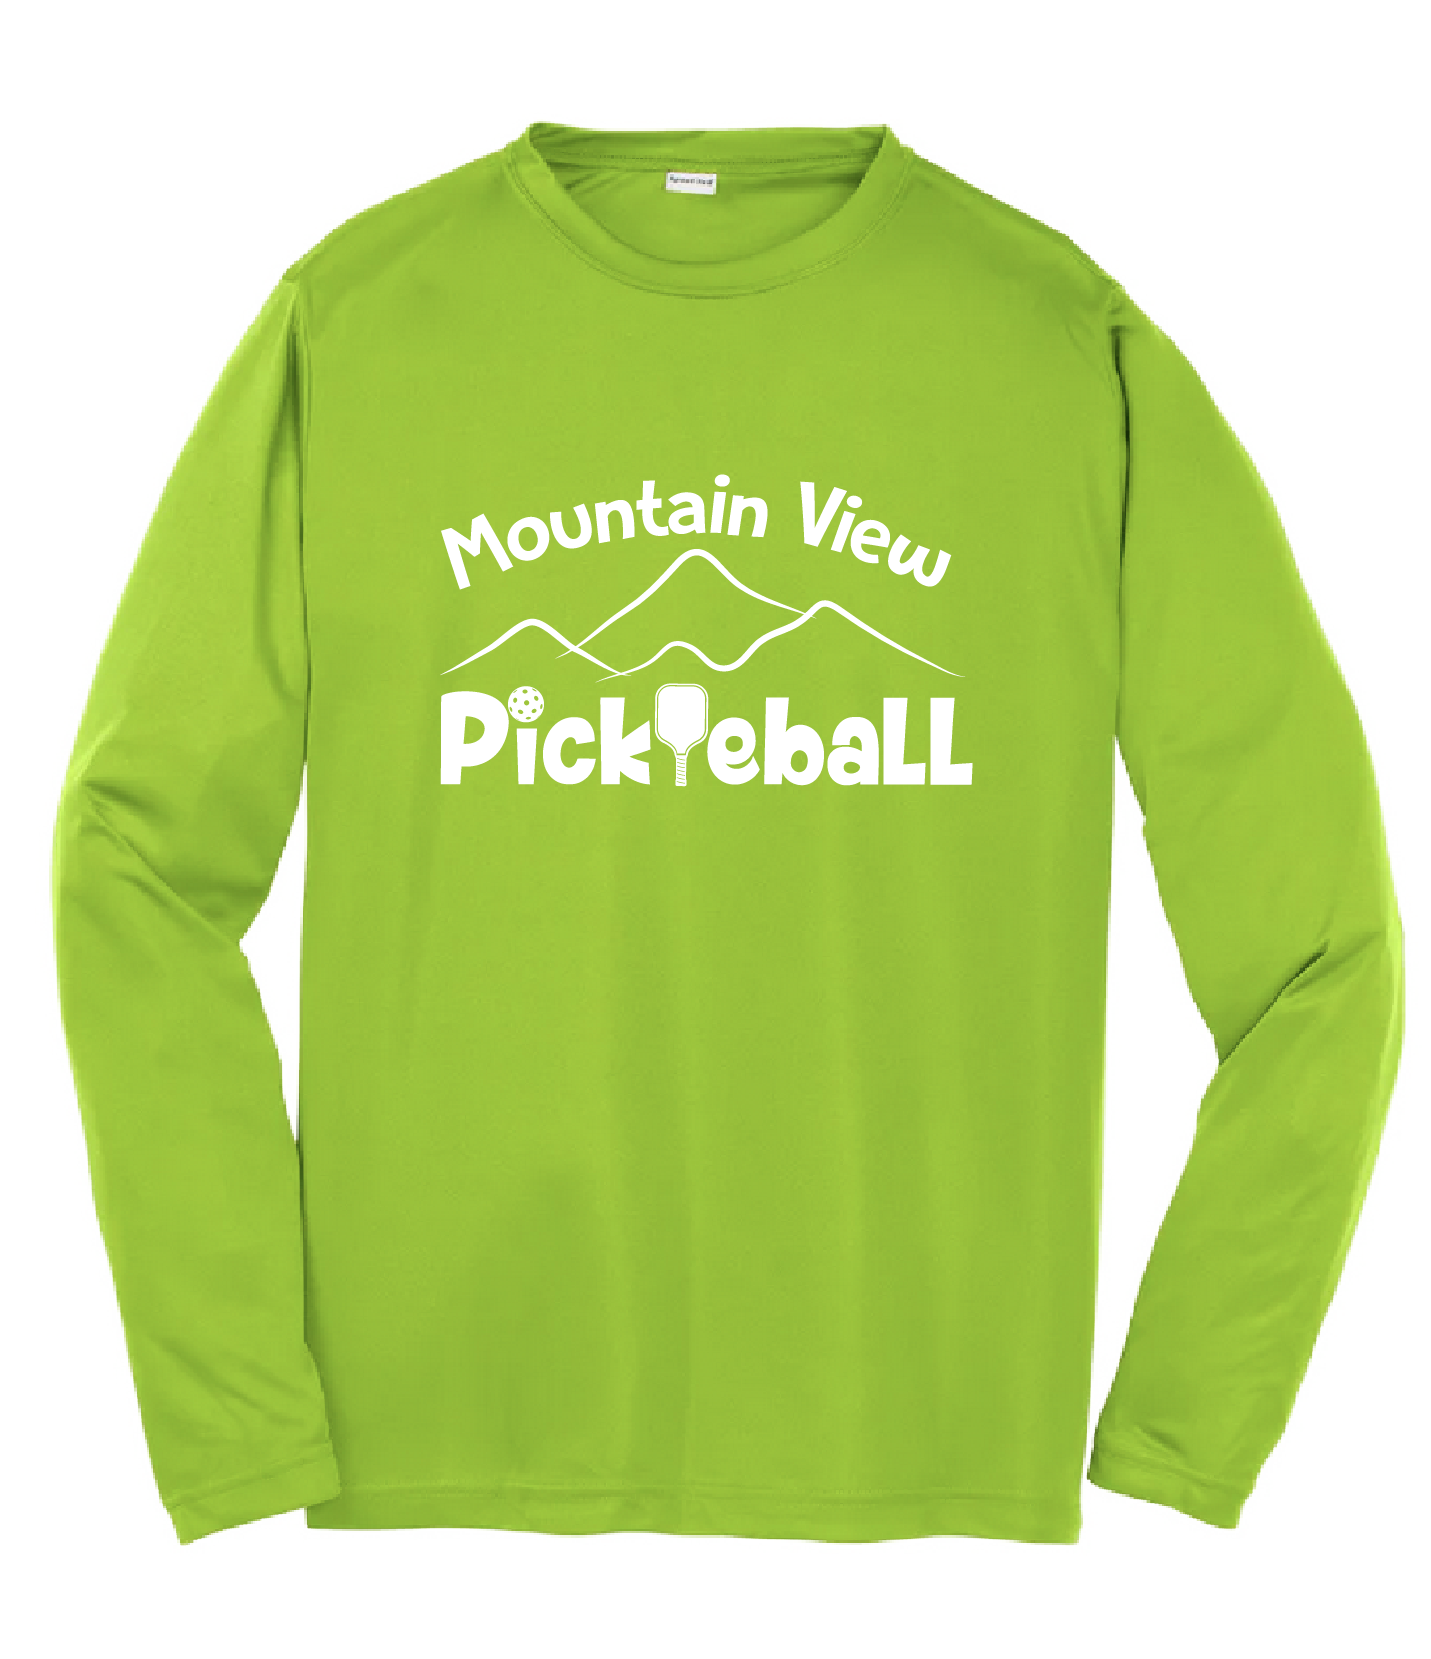 Pickleball Design: Mountain View Pickleball Club  Youth Styles: Long Sleeve  Shirts are lightweight, roomy and highly breathable. These moisture-wicking shirts are designed for athletic performance. They feature PosiCharge technology to lock in color and prevent logos from fading. Removable tag and set-in sleeves for comfort.